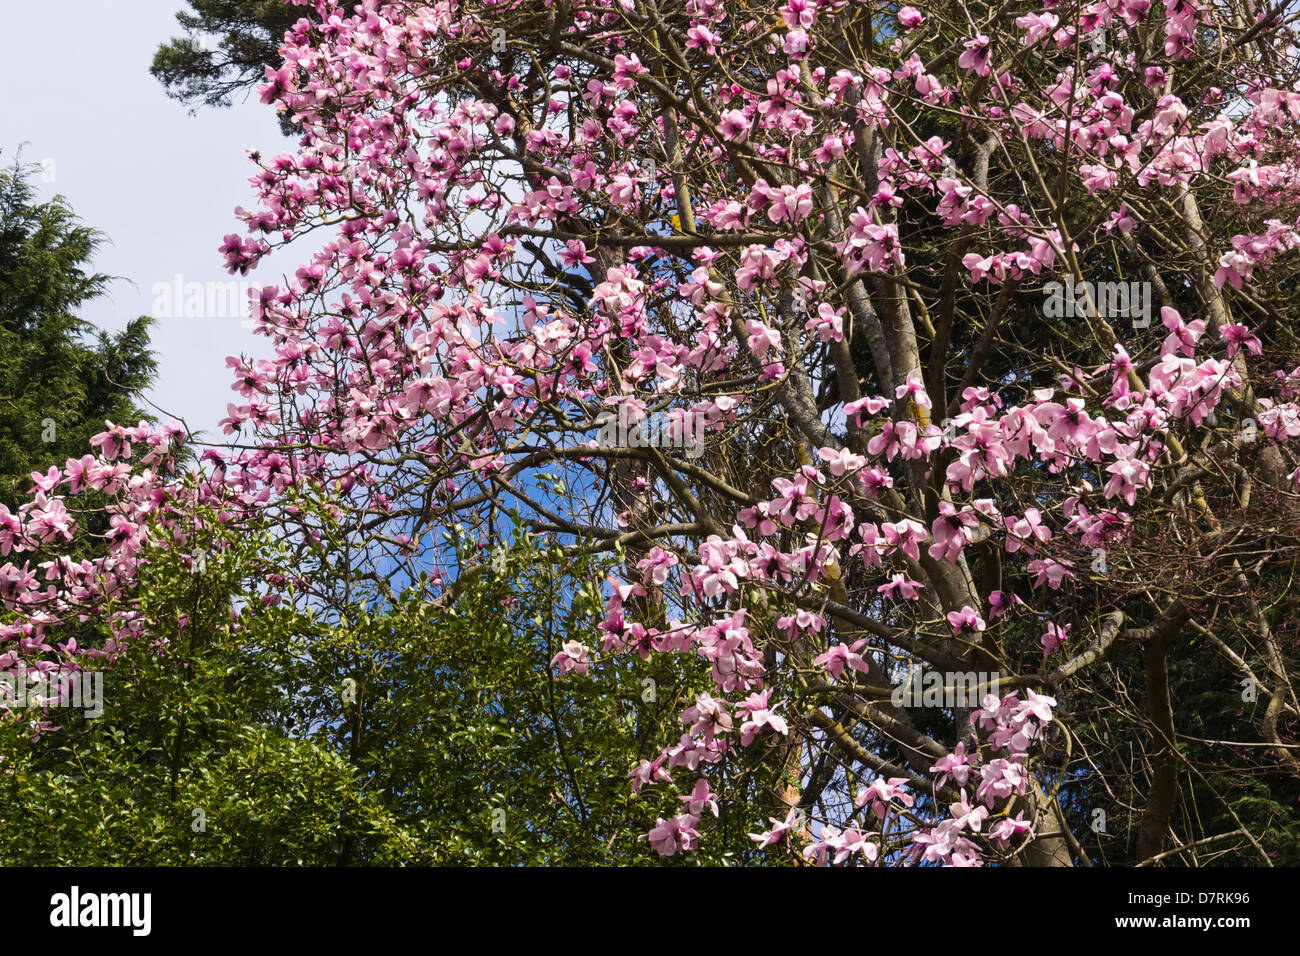 Magnolie in fiore a Howick Hall Giardini in Northumberland Foto Stock